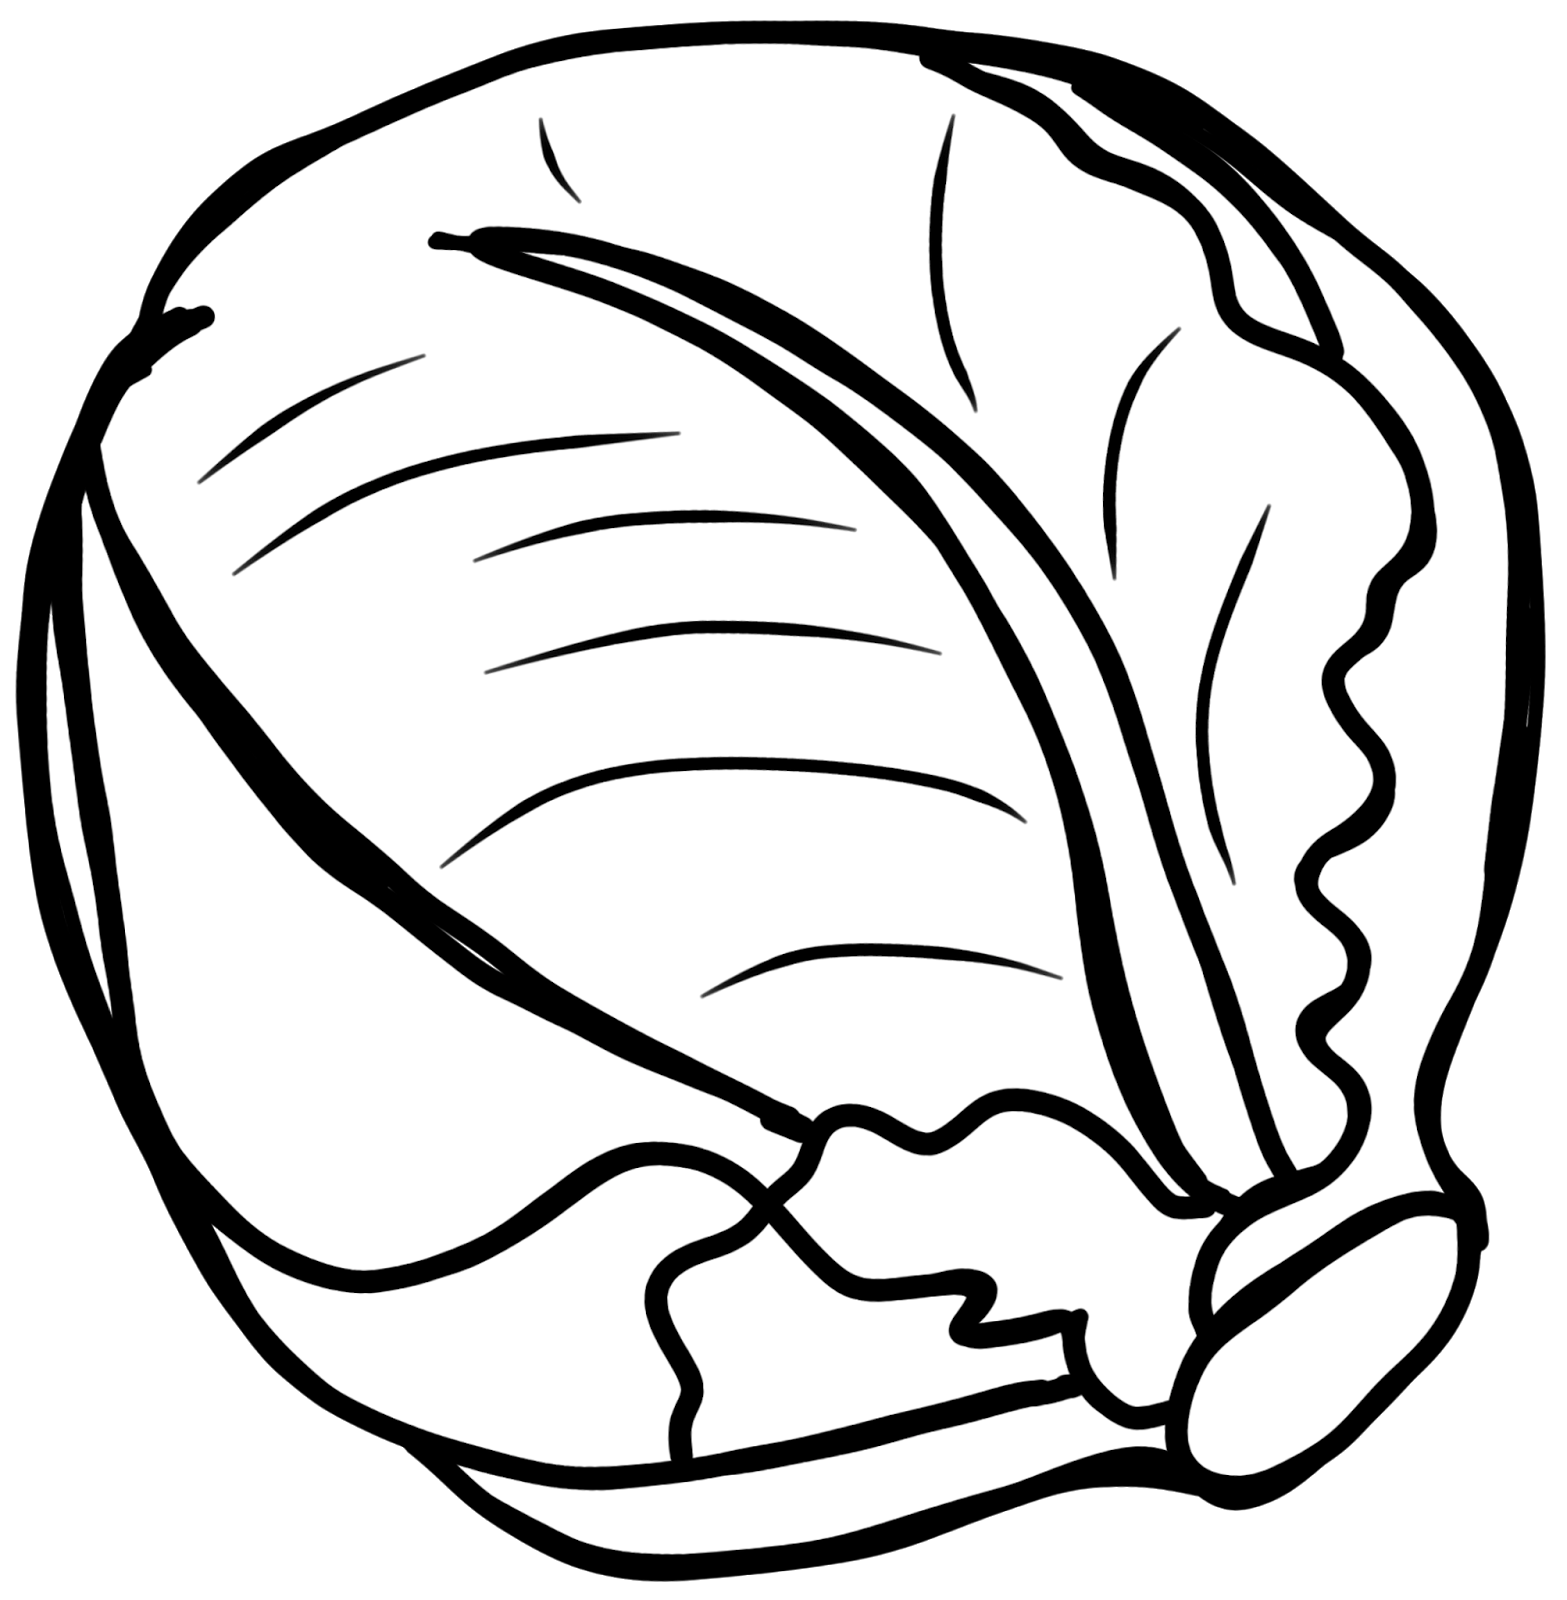 Cabbage black and white. Onion clipart vegetablesblack